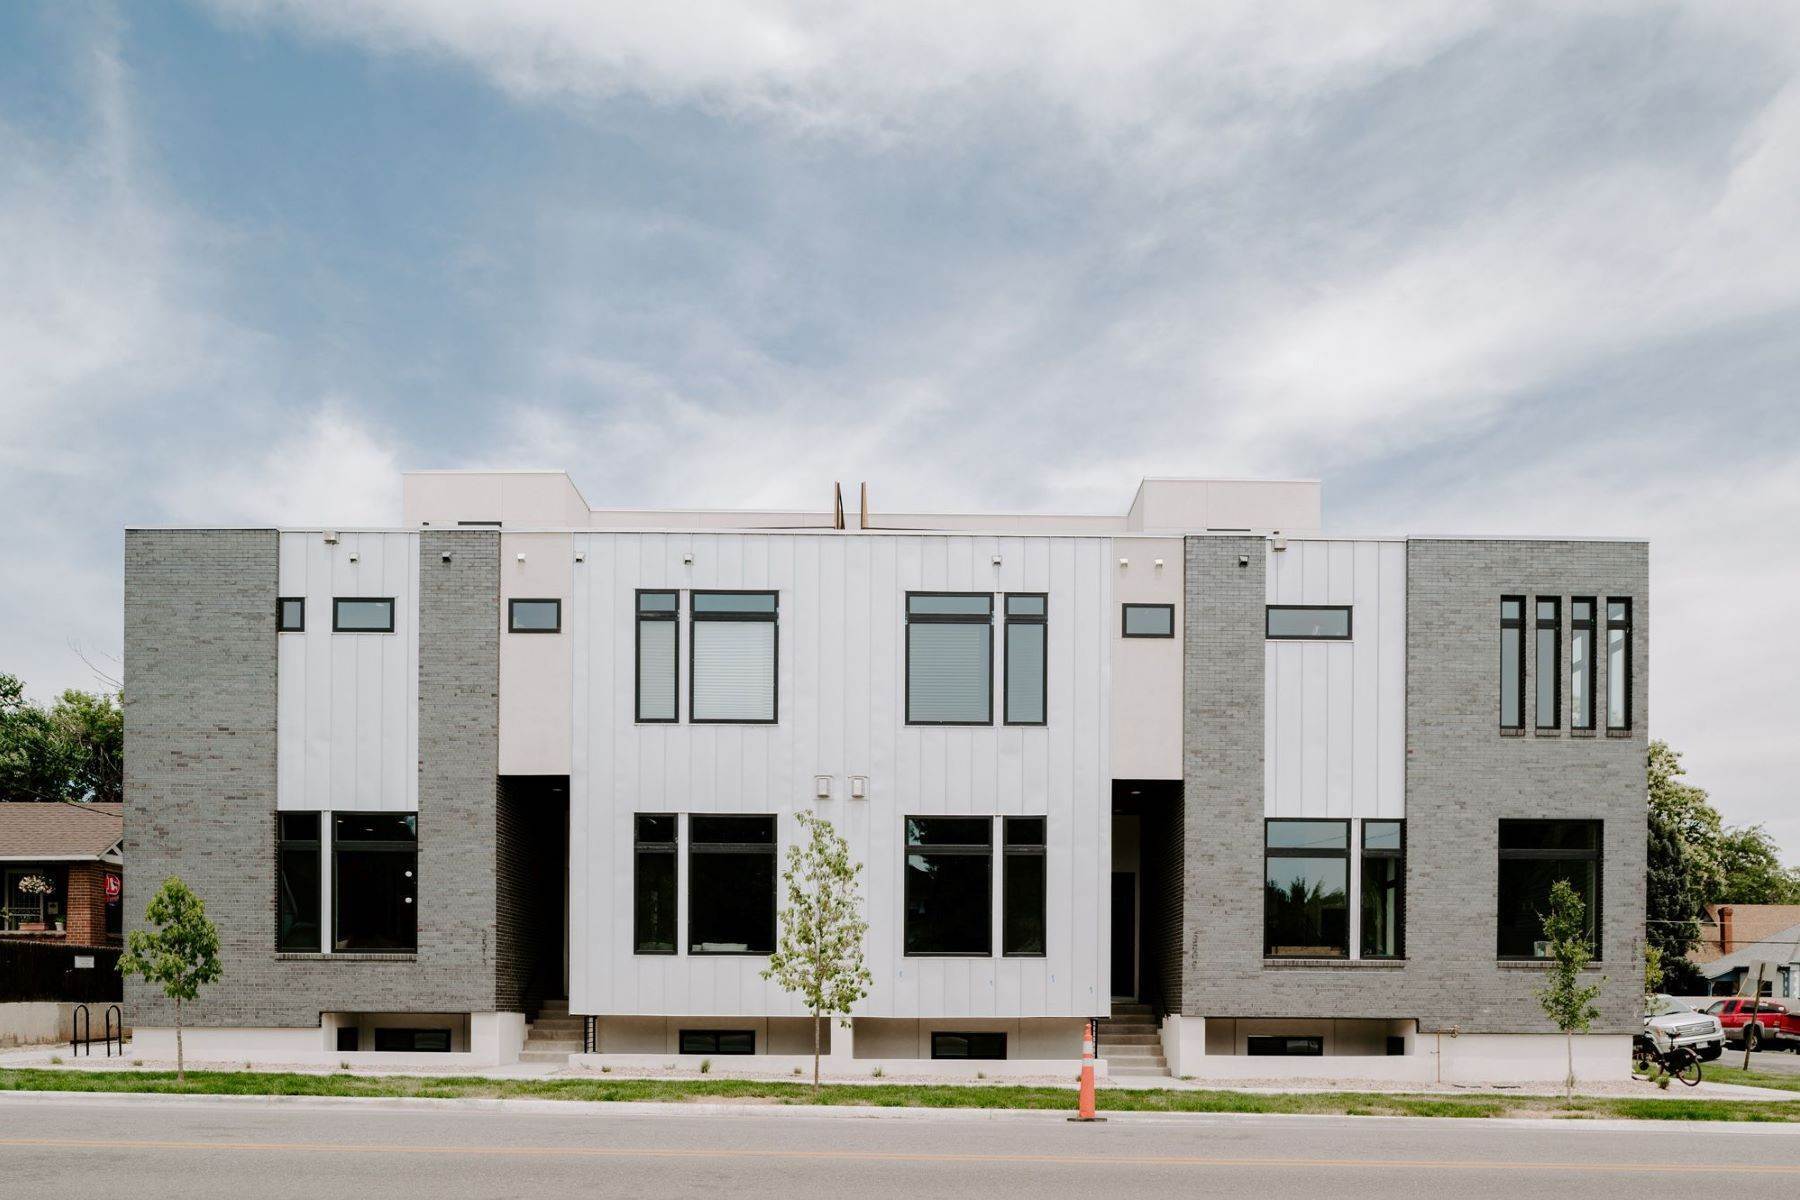 Property for Active at Quality craftsmanship abounds in this newly built modern townhouse 2317 King Street Denver, Colorado 80211 United States